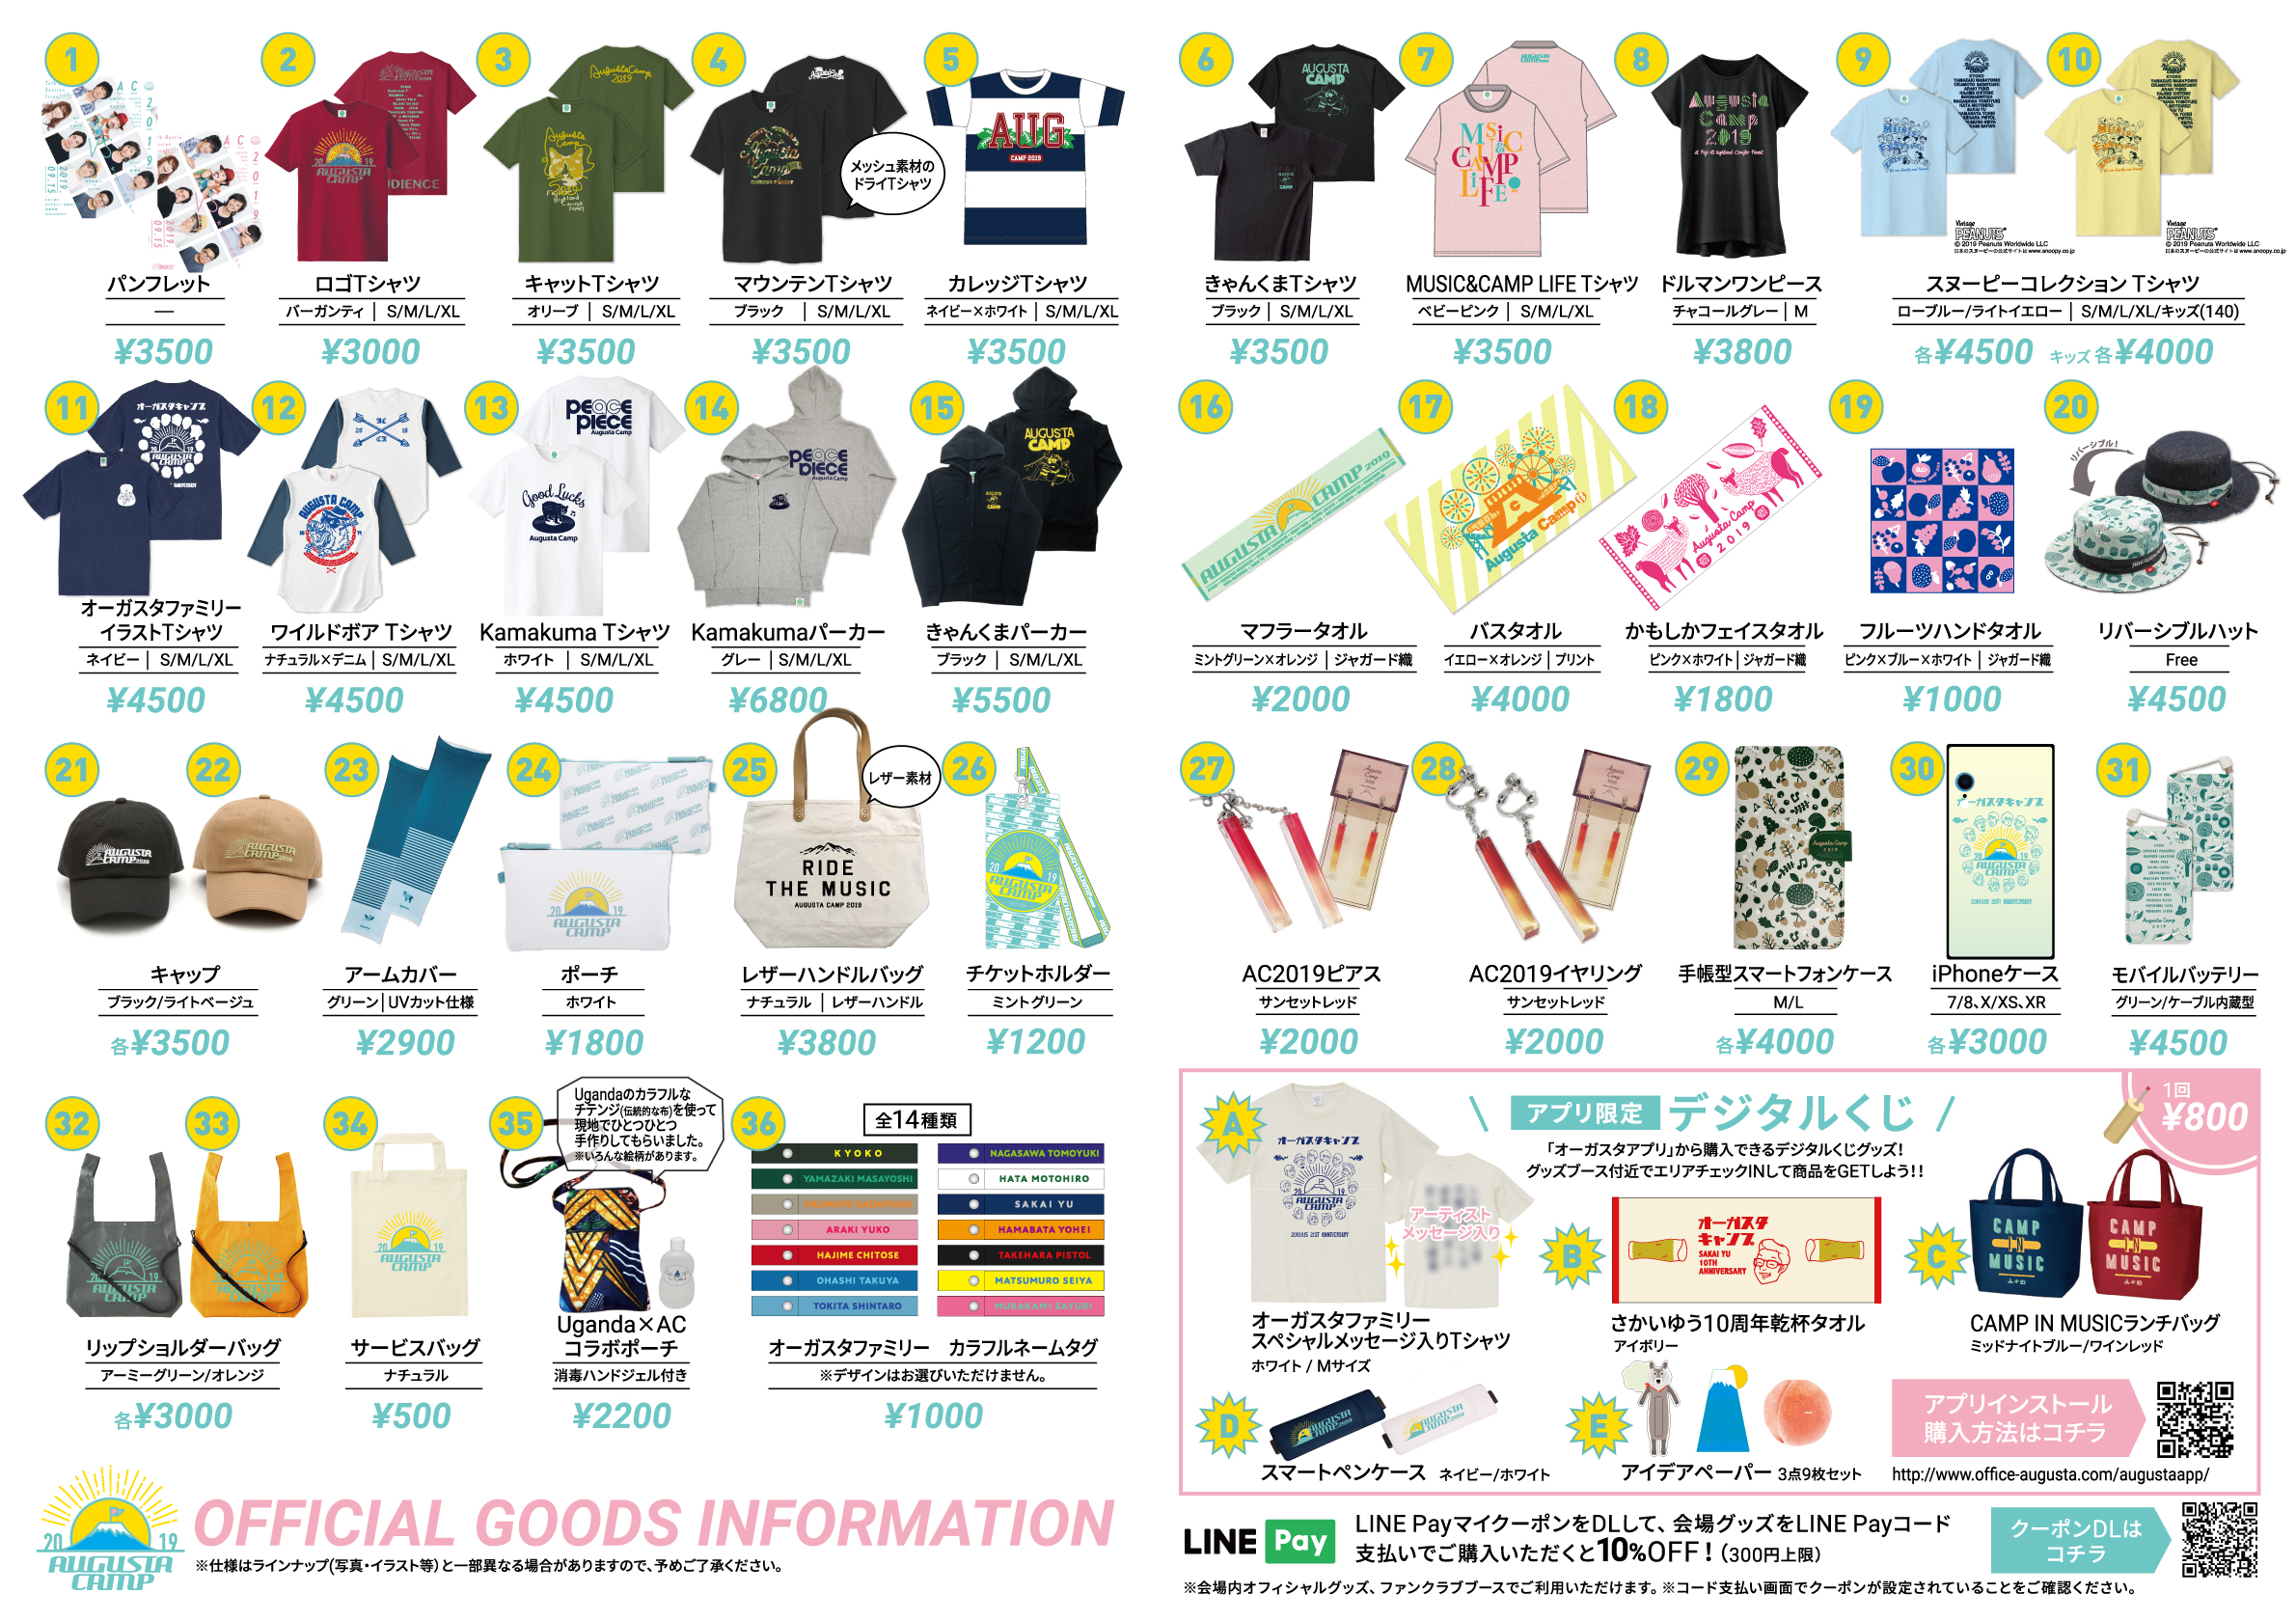 Augusta Camp 2019 Goods for sale on the day